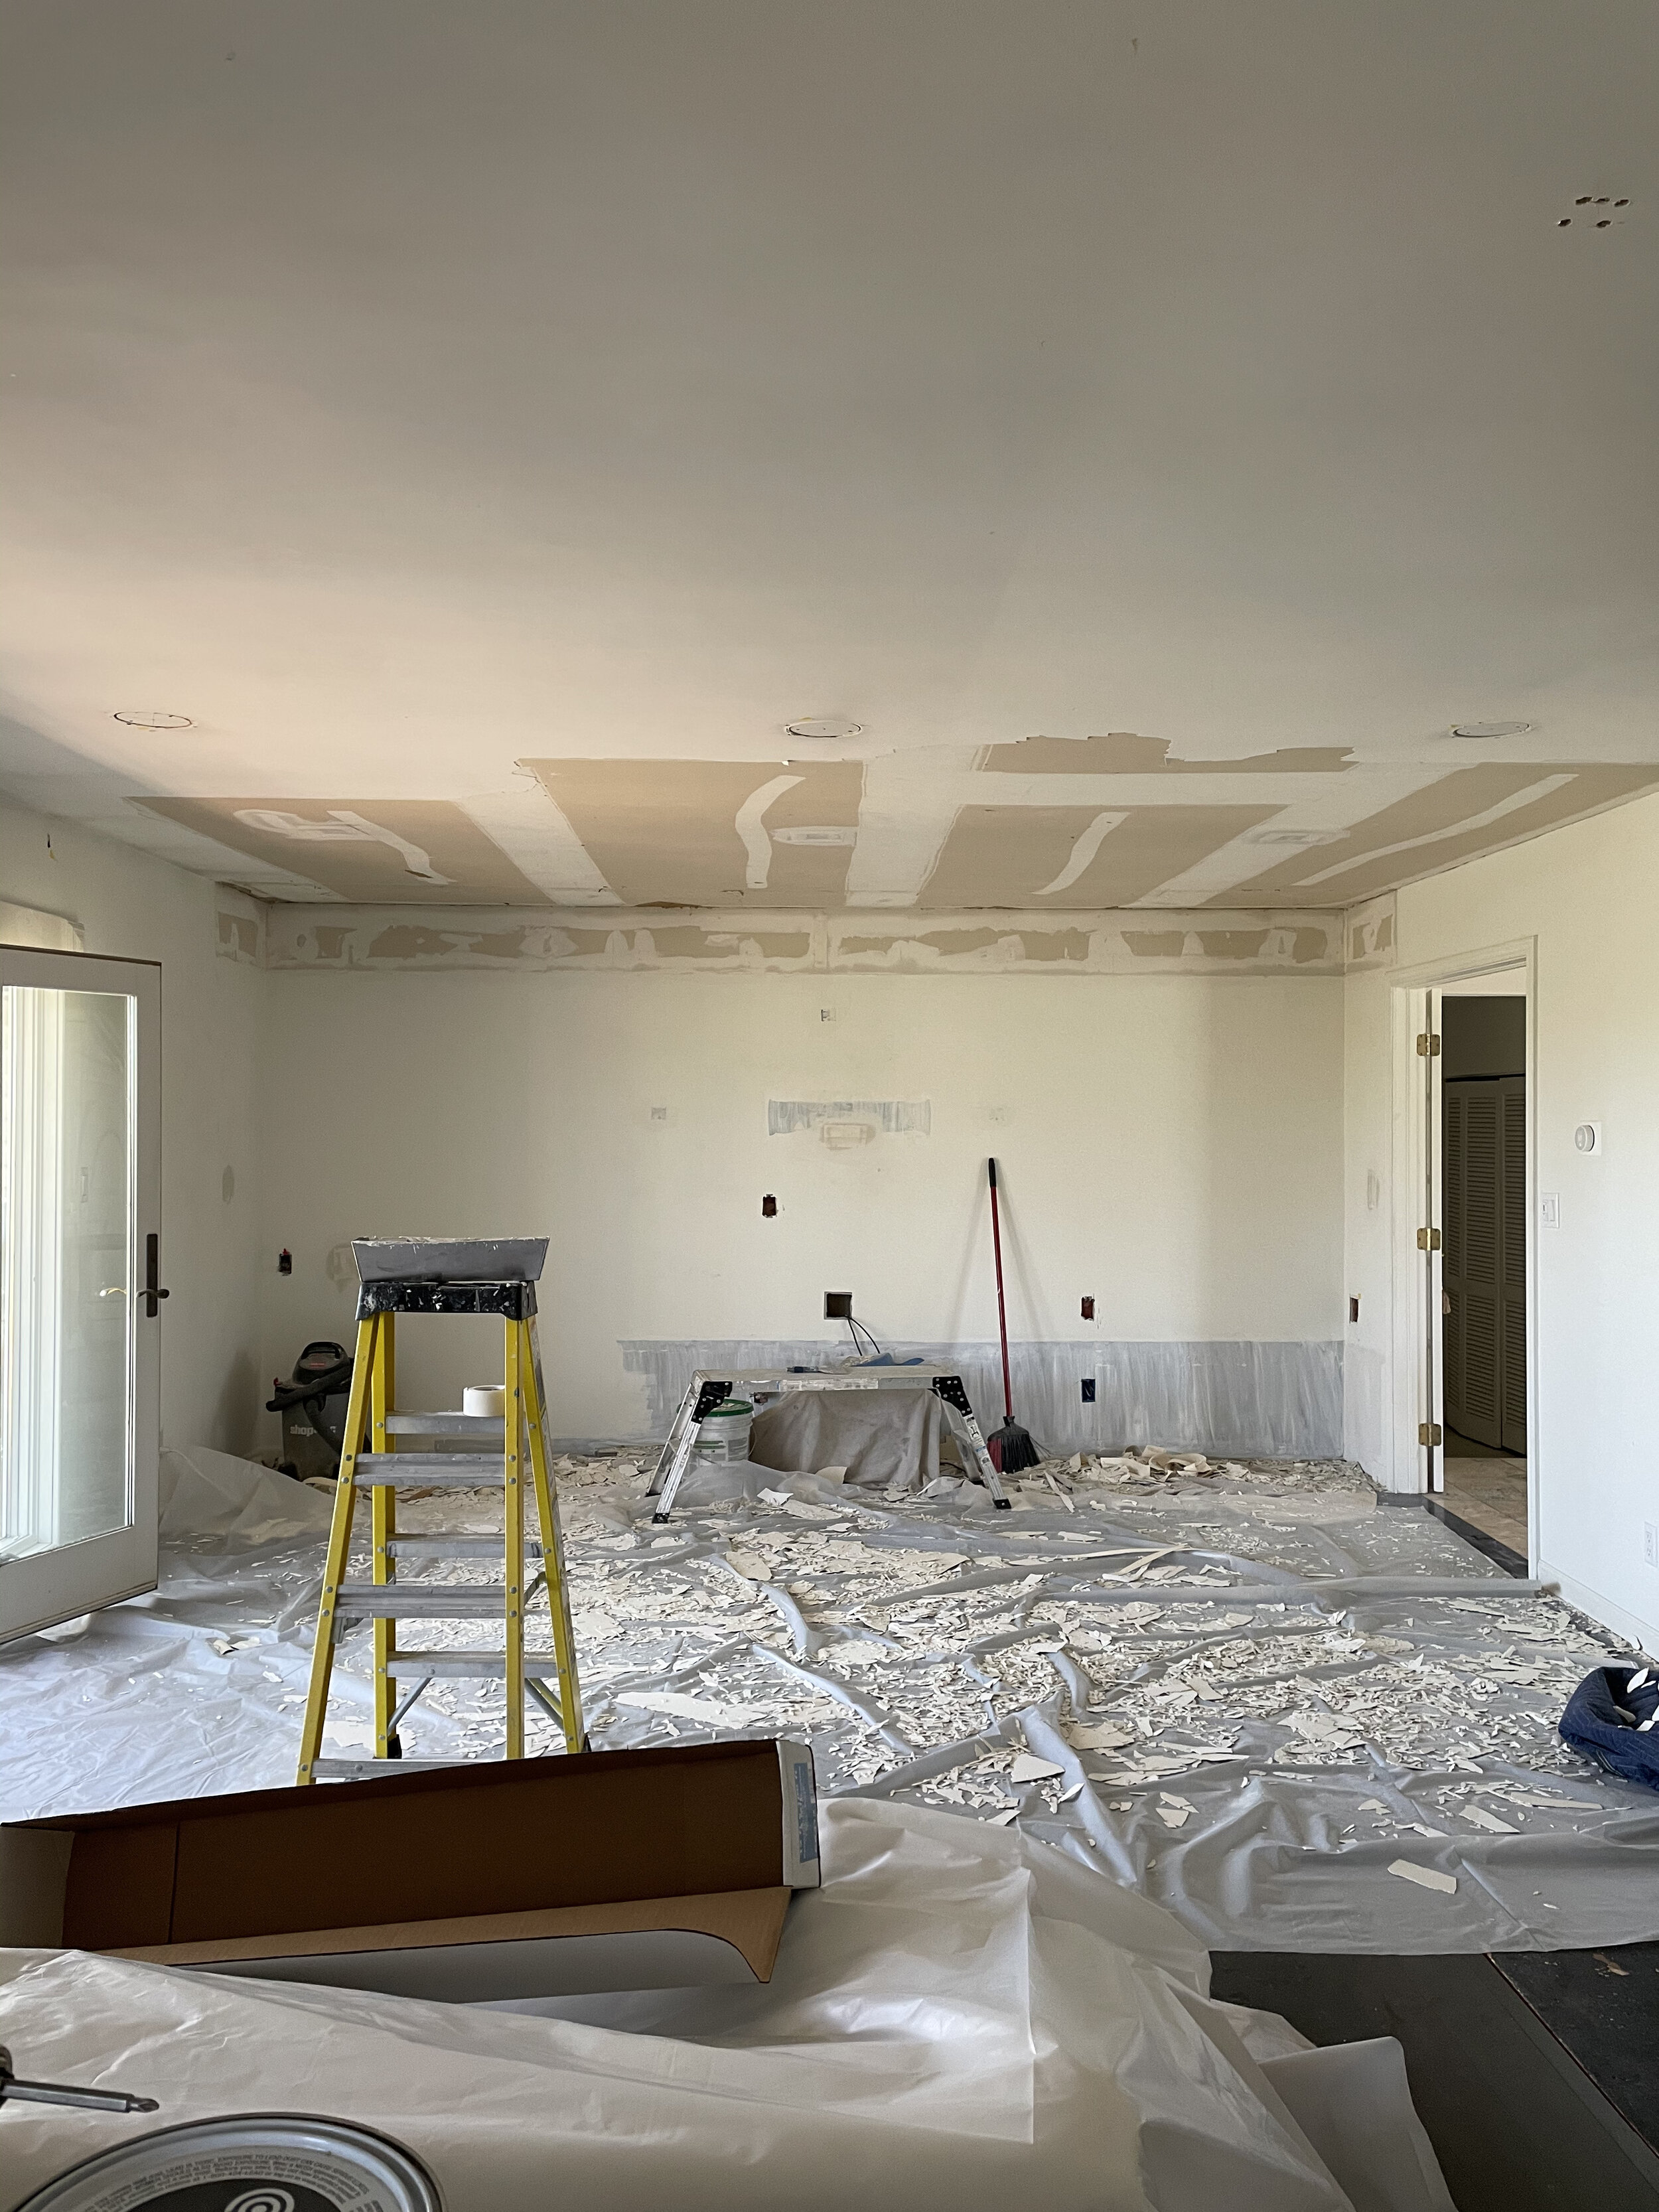 Scraping the old popcorn ceiling and patching the can light cutouts